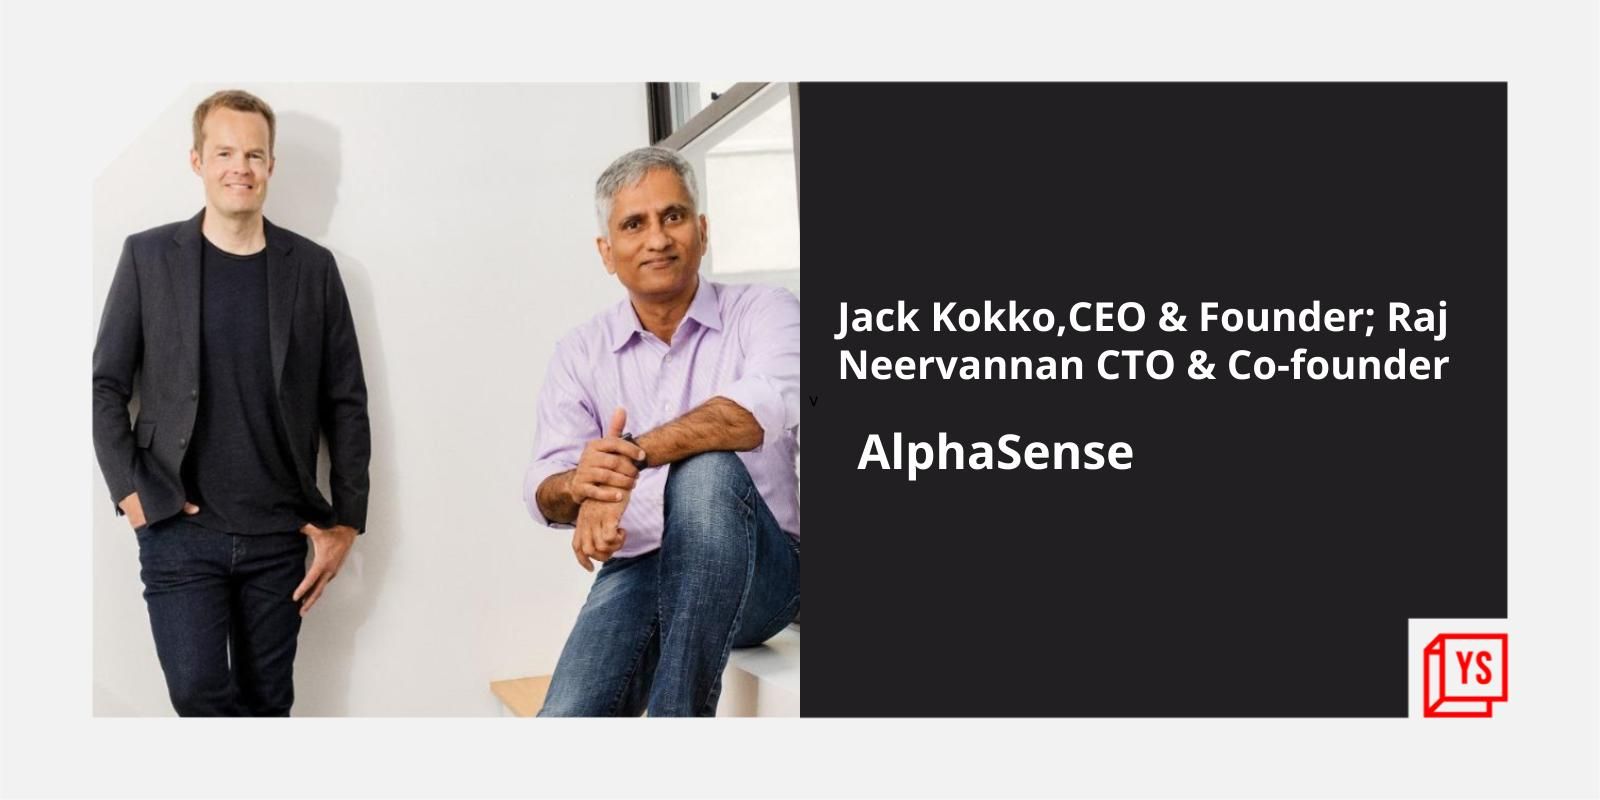 [Funding alert] AlphaSense raises $225M in Series D round, valuation jumps to $1.7 B